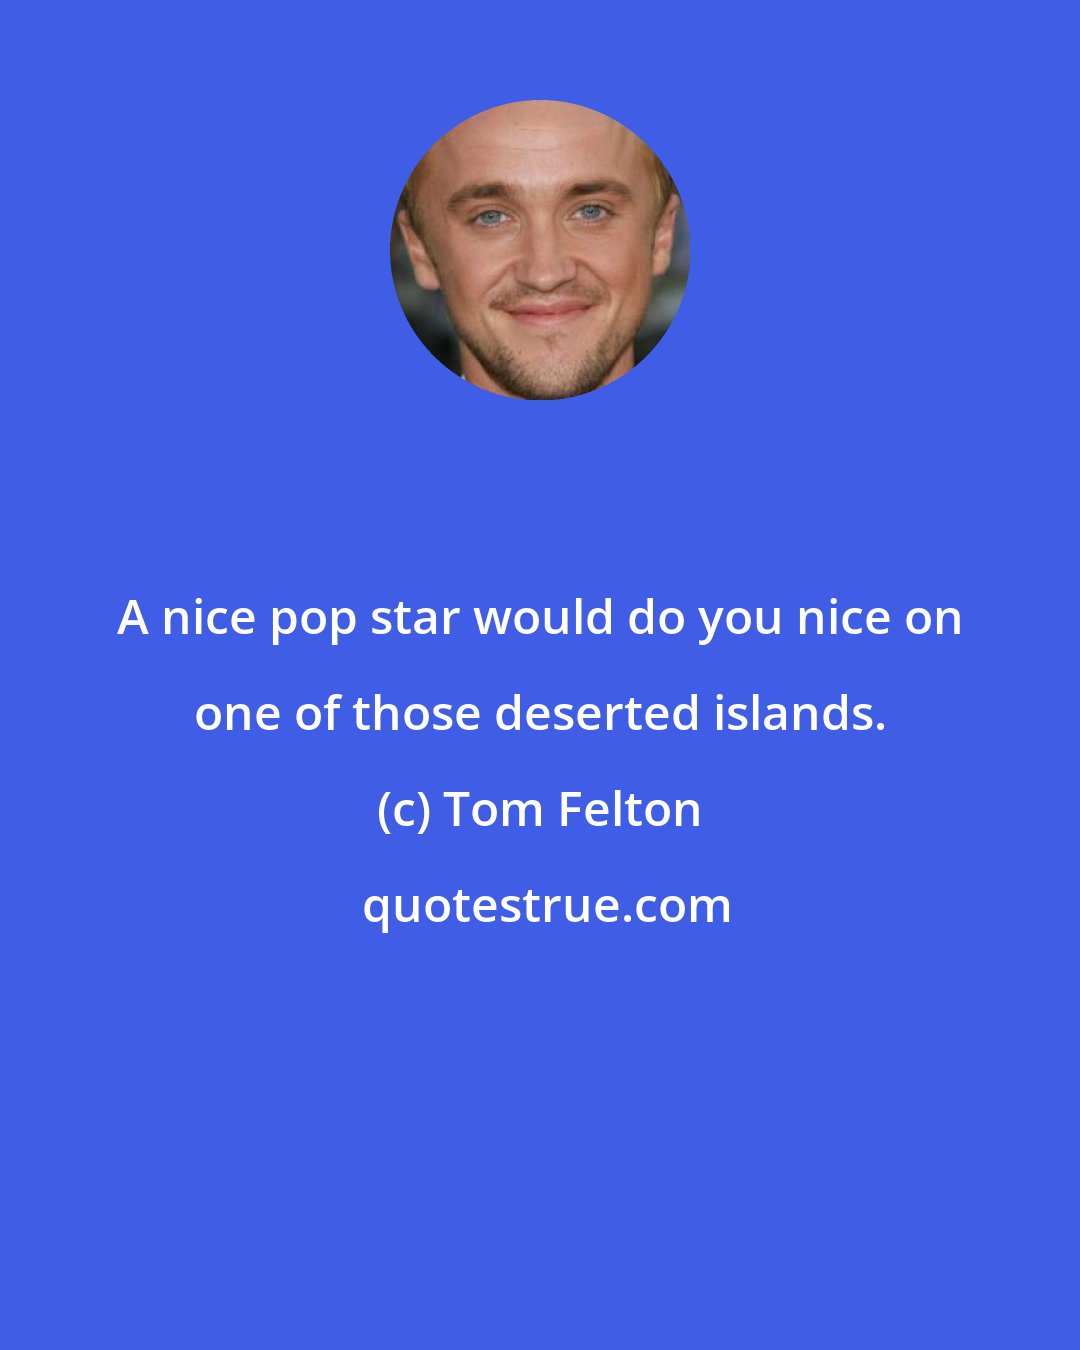 Tom Felton: A nice pop star would do you nice on one of those deserted islands.